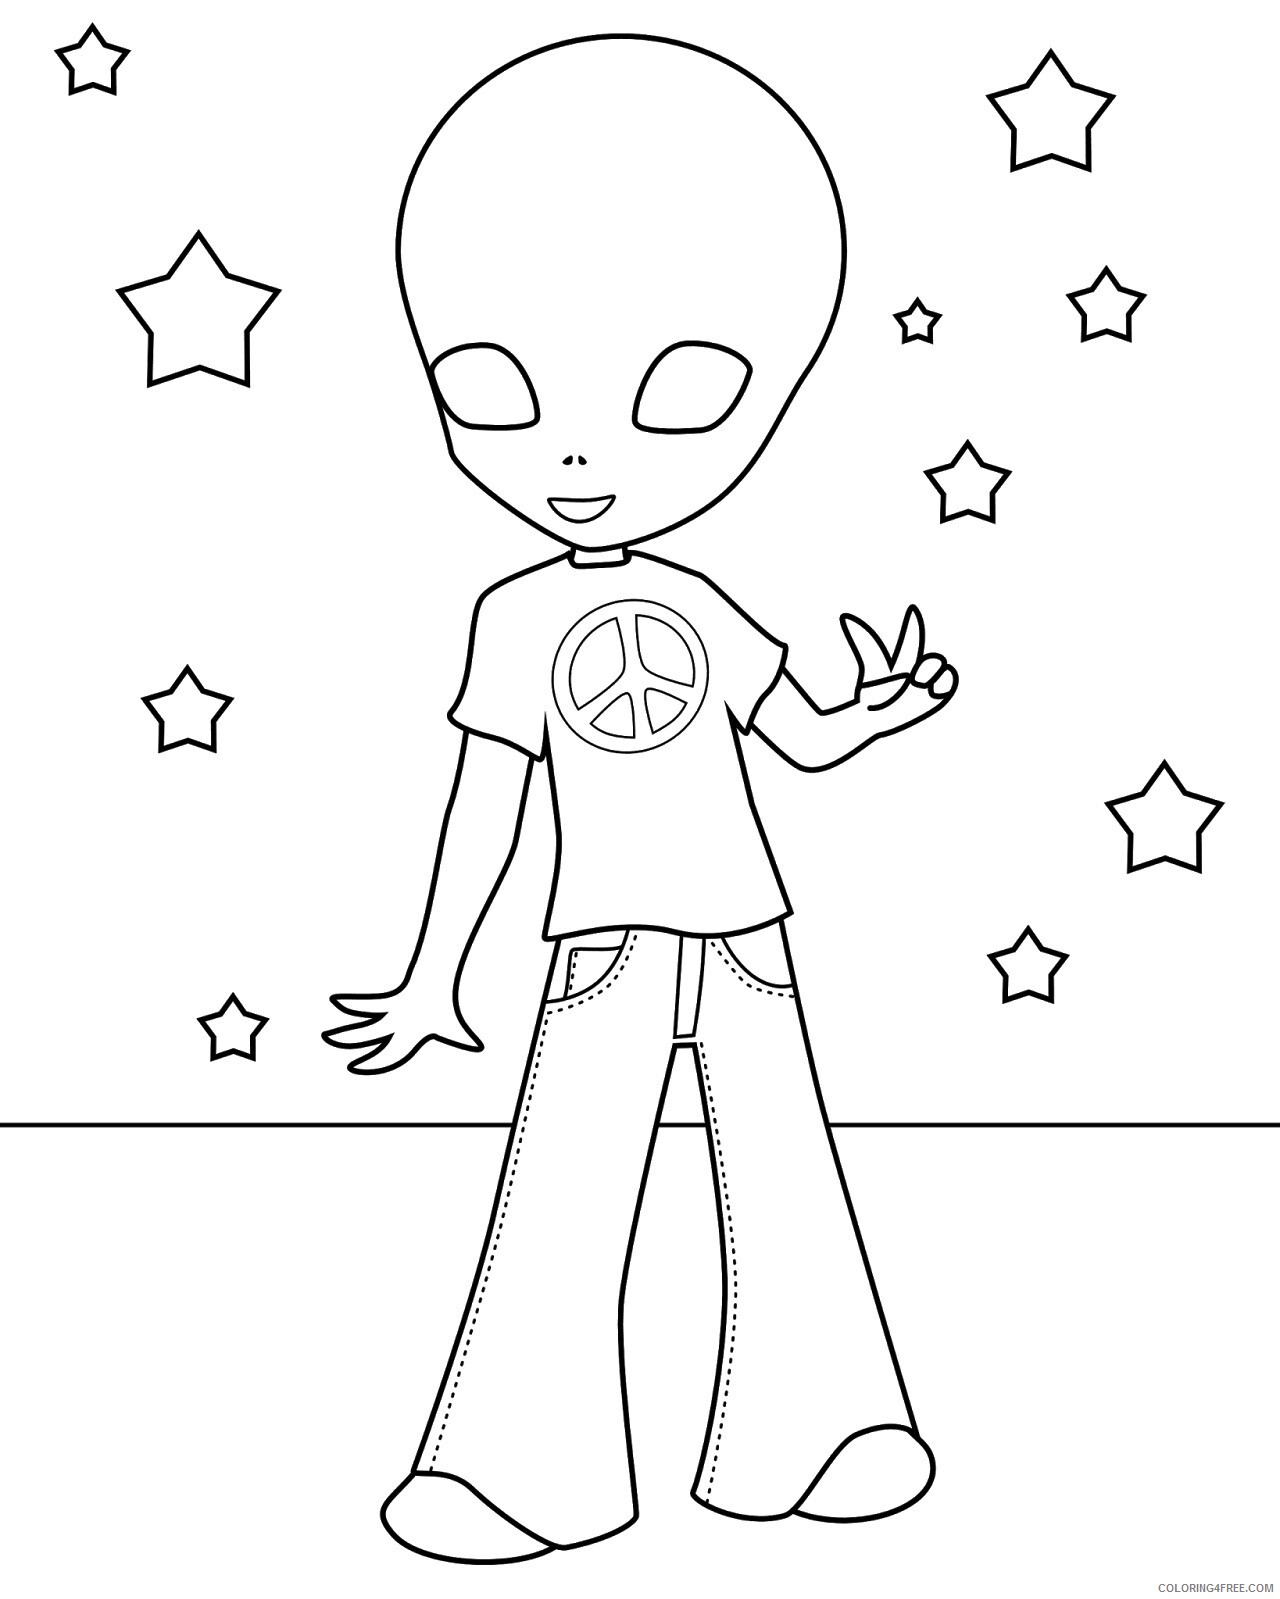 Alien Coloring Pages Alien To Print Printable 2021 0124 Coloring4free